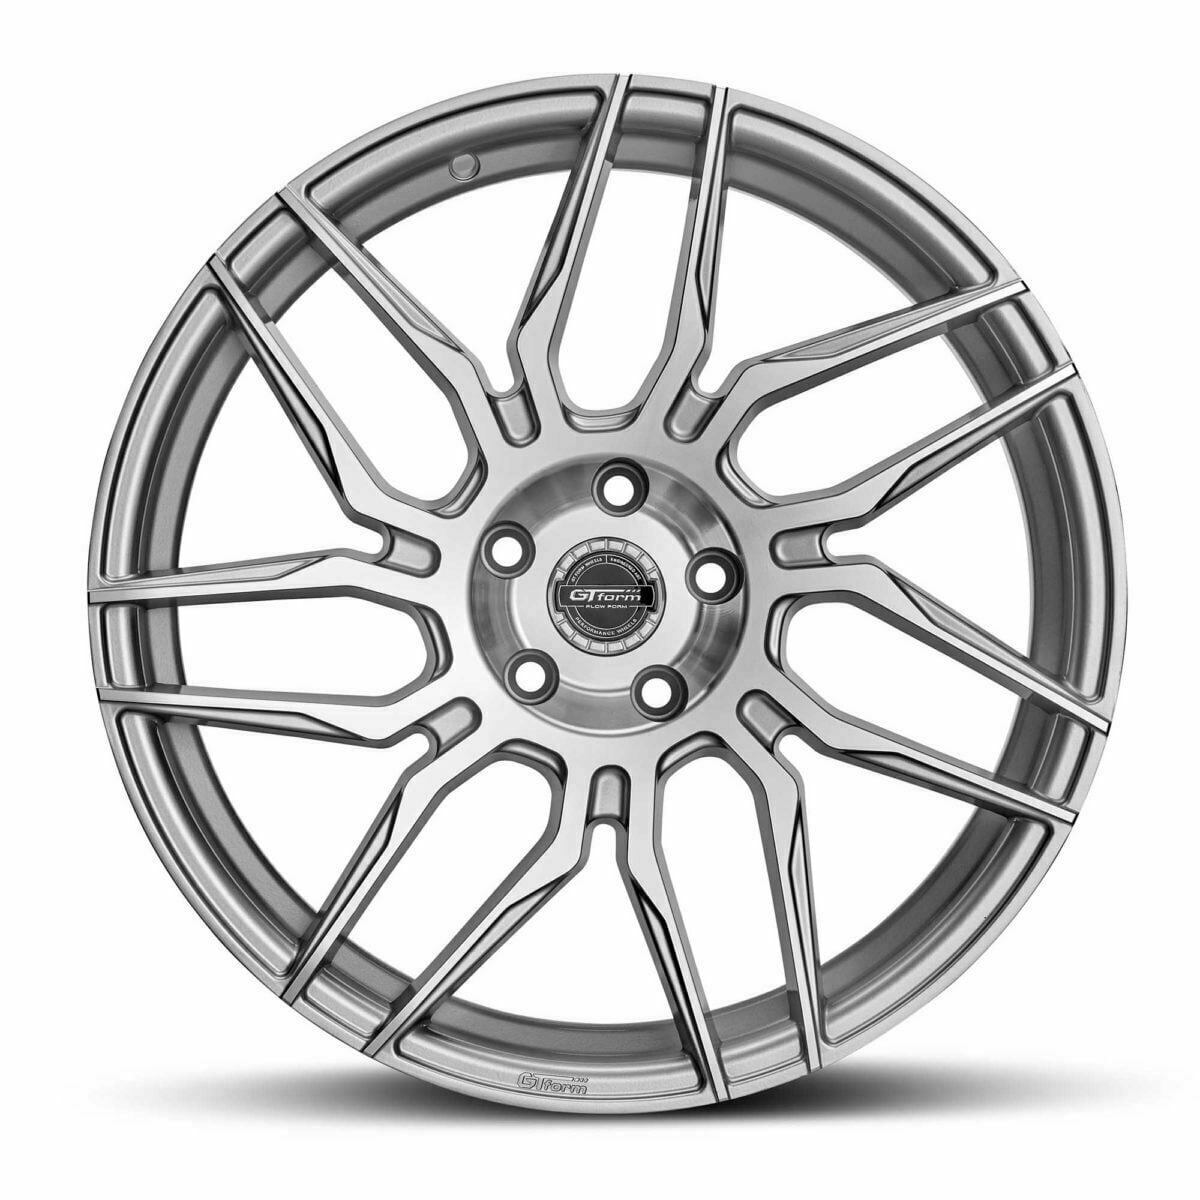 GT form Tycoon Silver Machined Face Wheel Rim Performance wheels